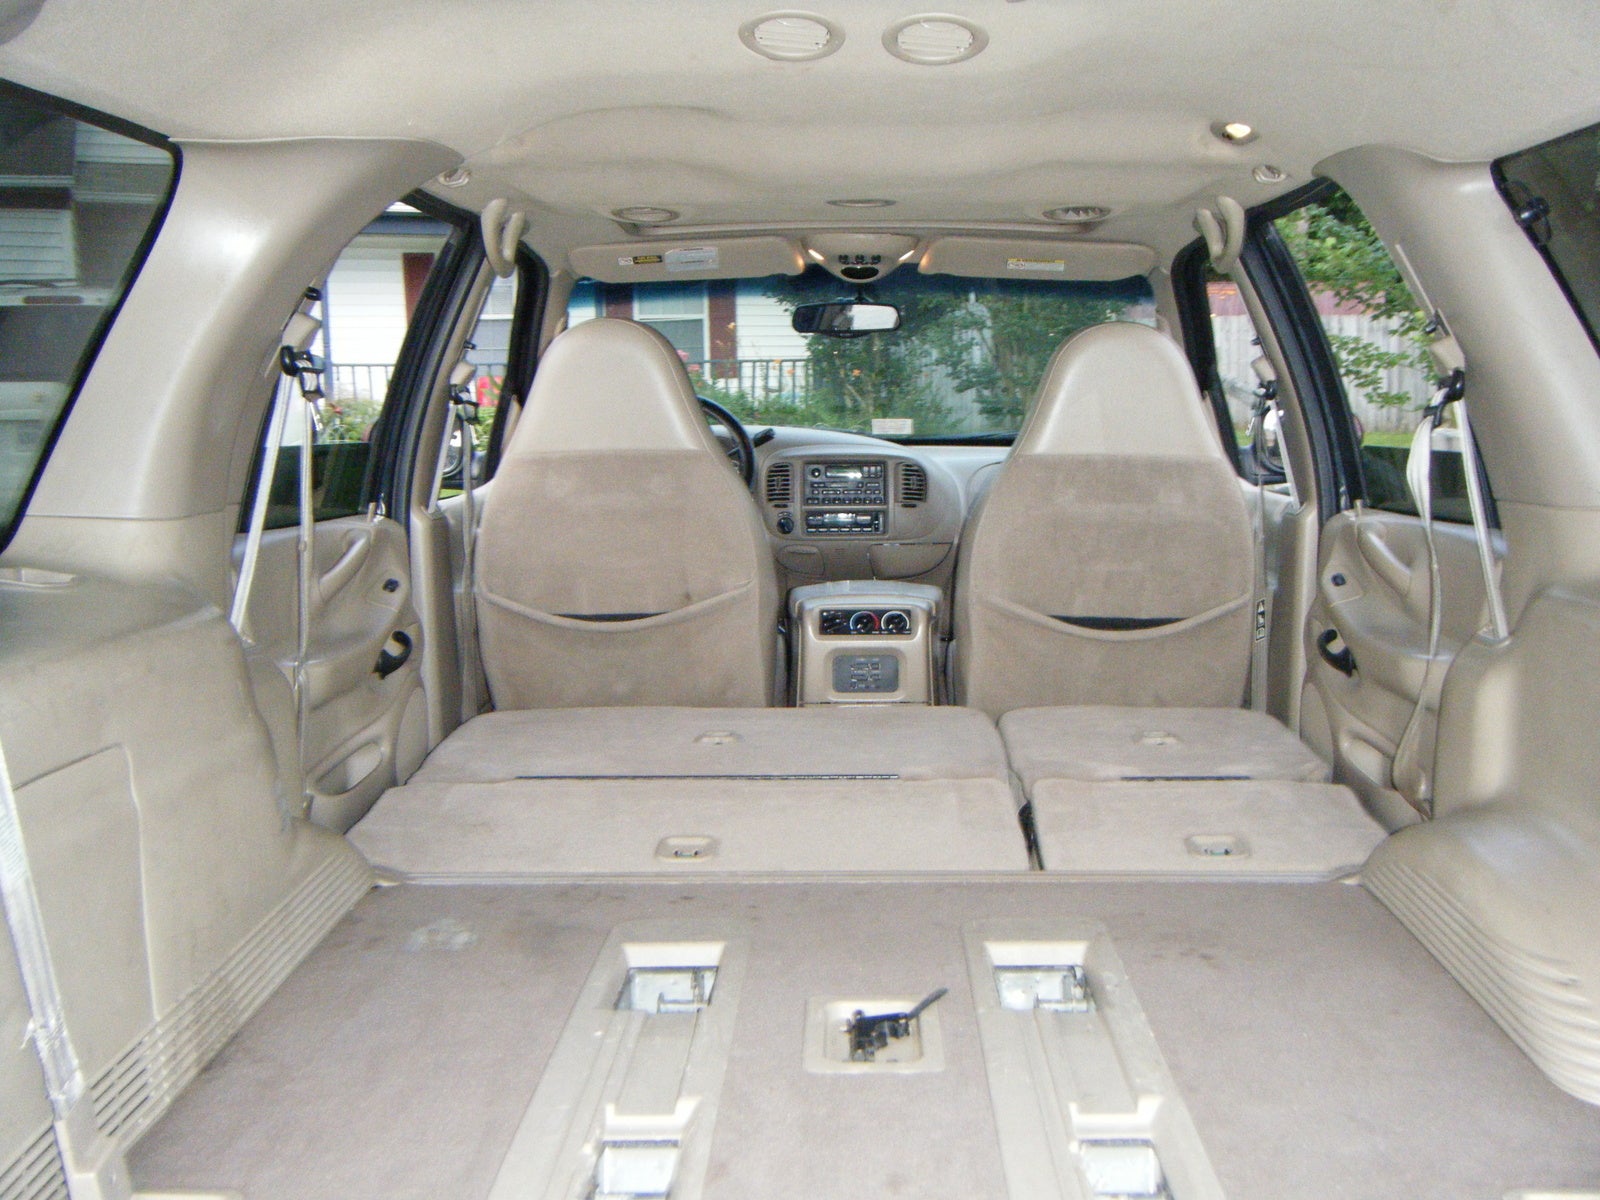 2000 Ford expedition interior dimensions #9